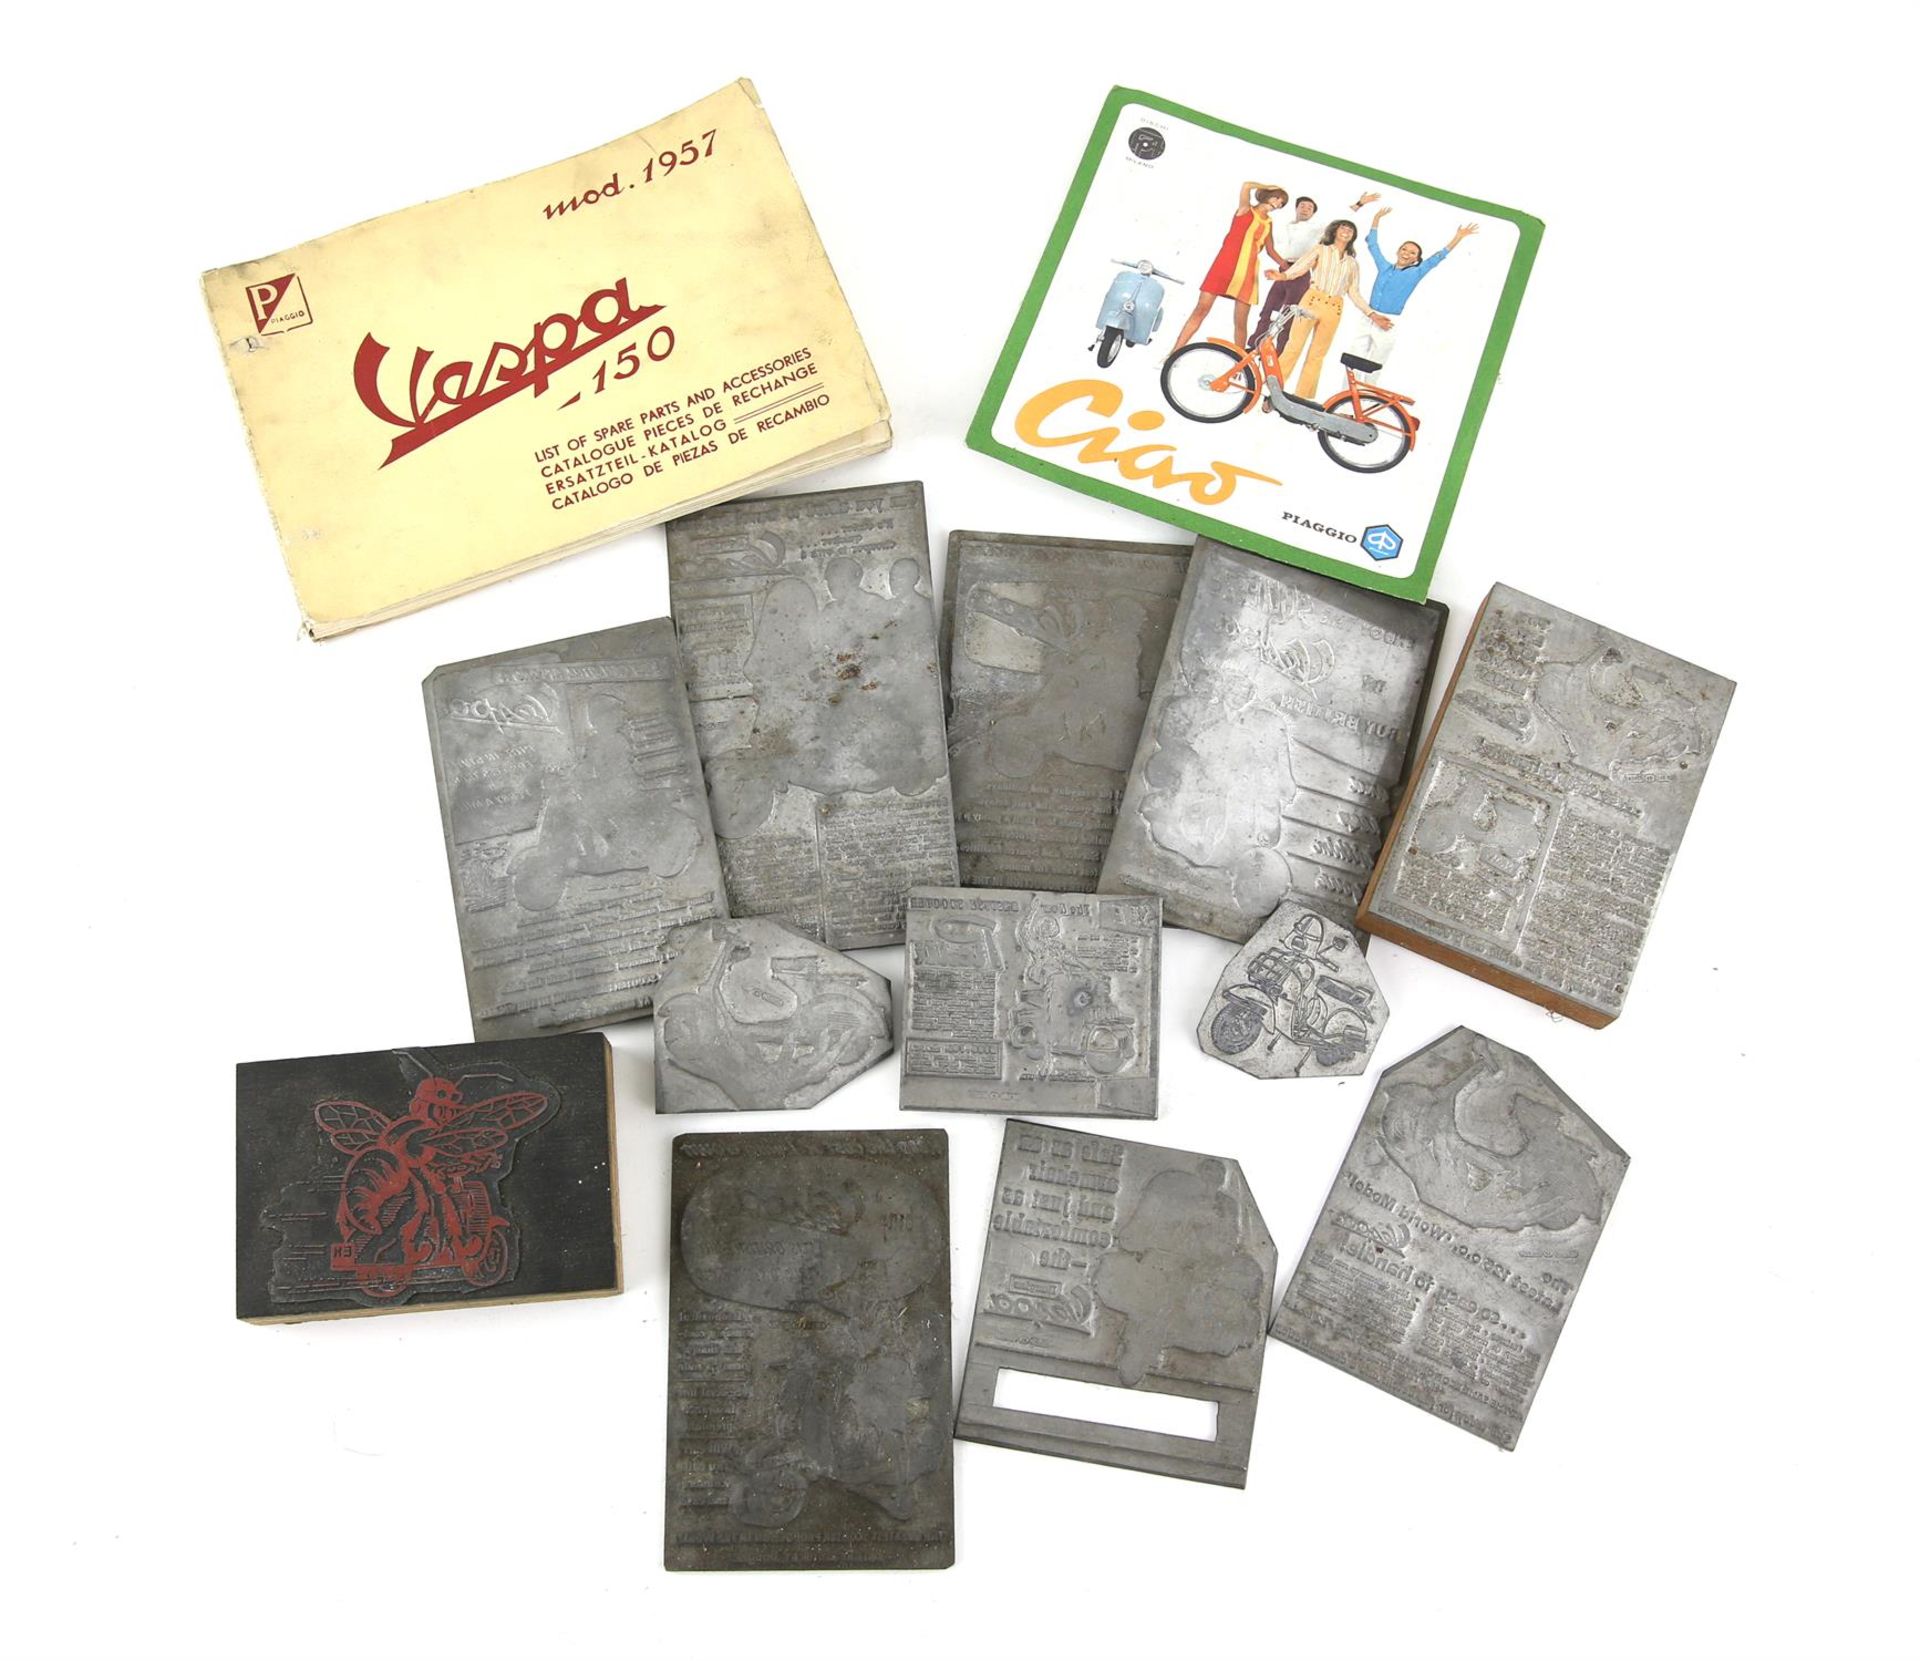 Large quantity of vintage Vespa and other scooter-related ephemera, including 'Vespa - 150,